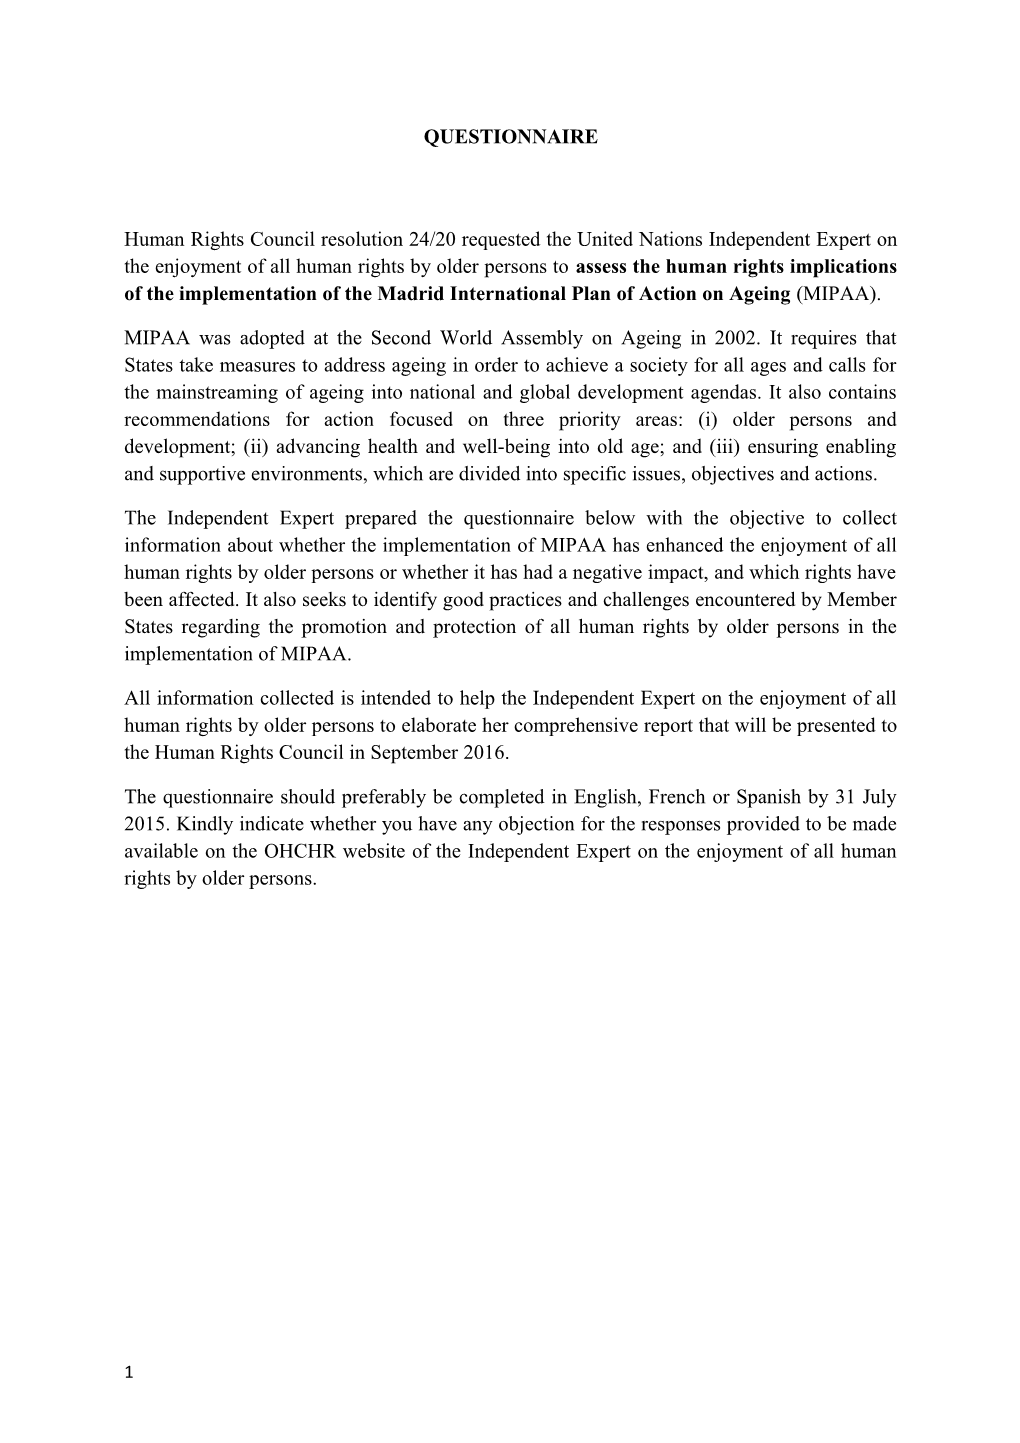 Human Rights Council Resolution 24/20 Requested the United Nations Independent Expert On